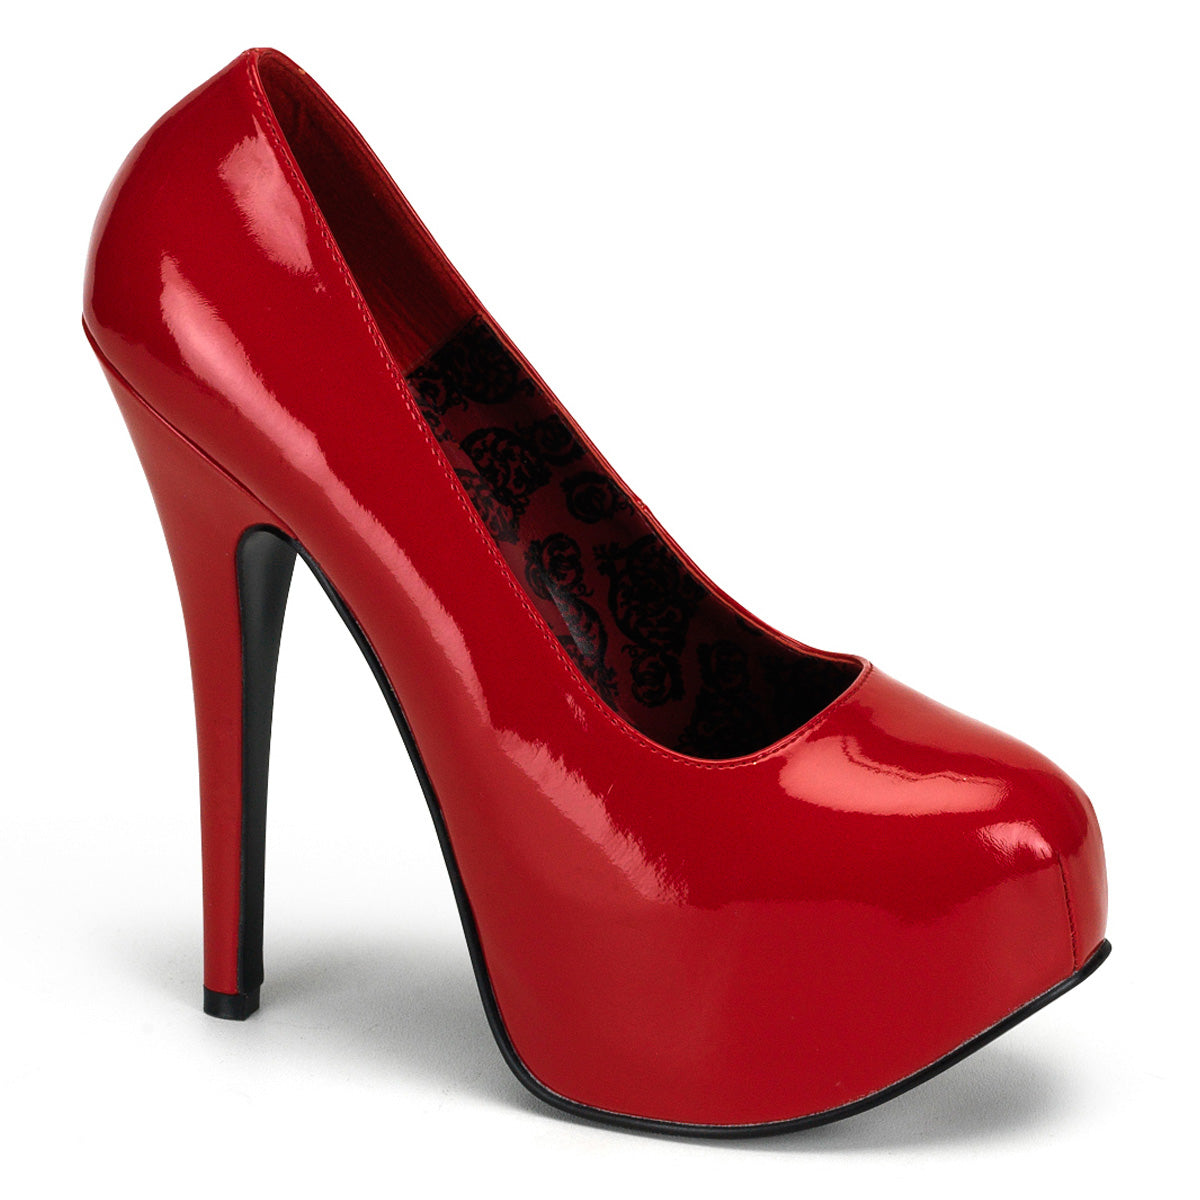 6 Inch Heel Red Sexy Shoes-Bordello- Sexy Shoes Fetish Heels